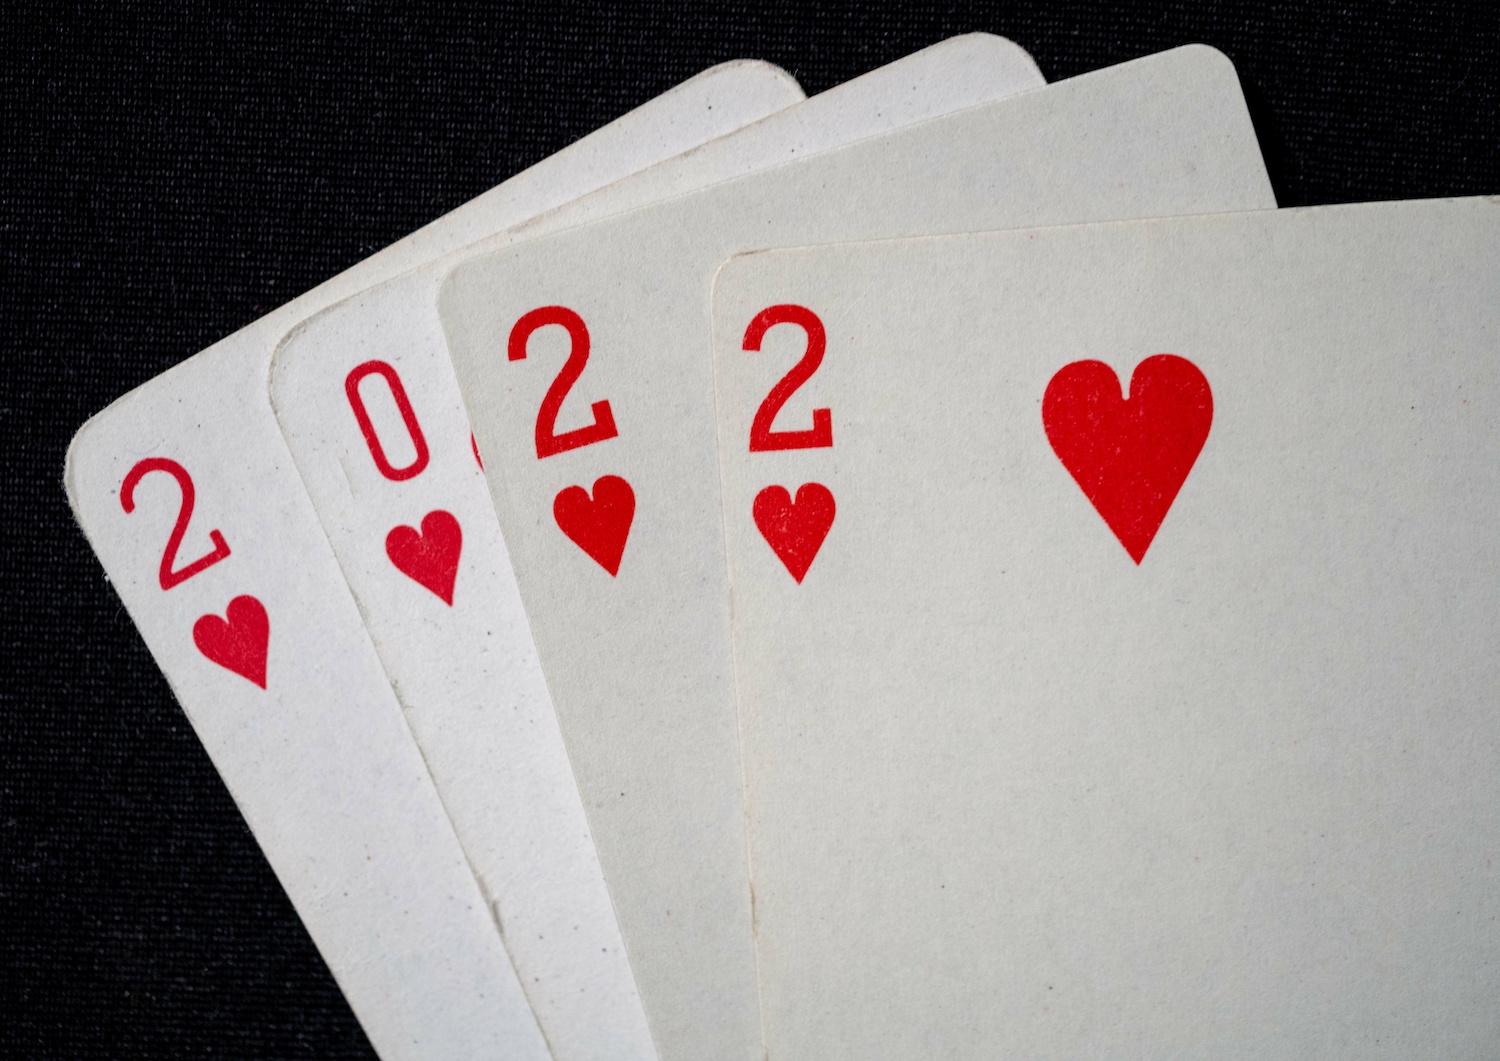 Contract and Duplicate Bridge News in 2022